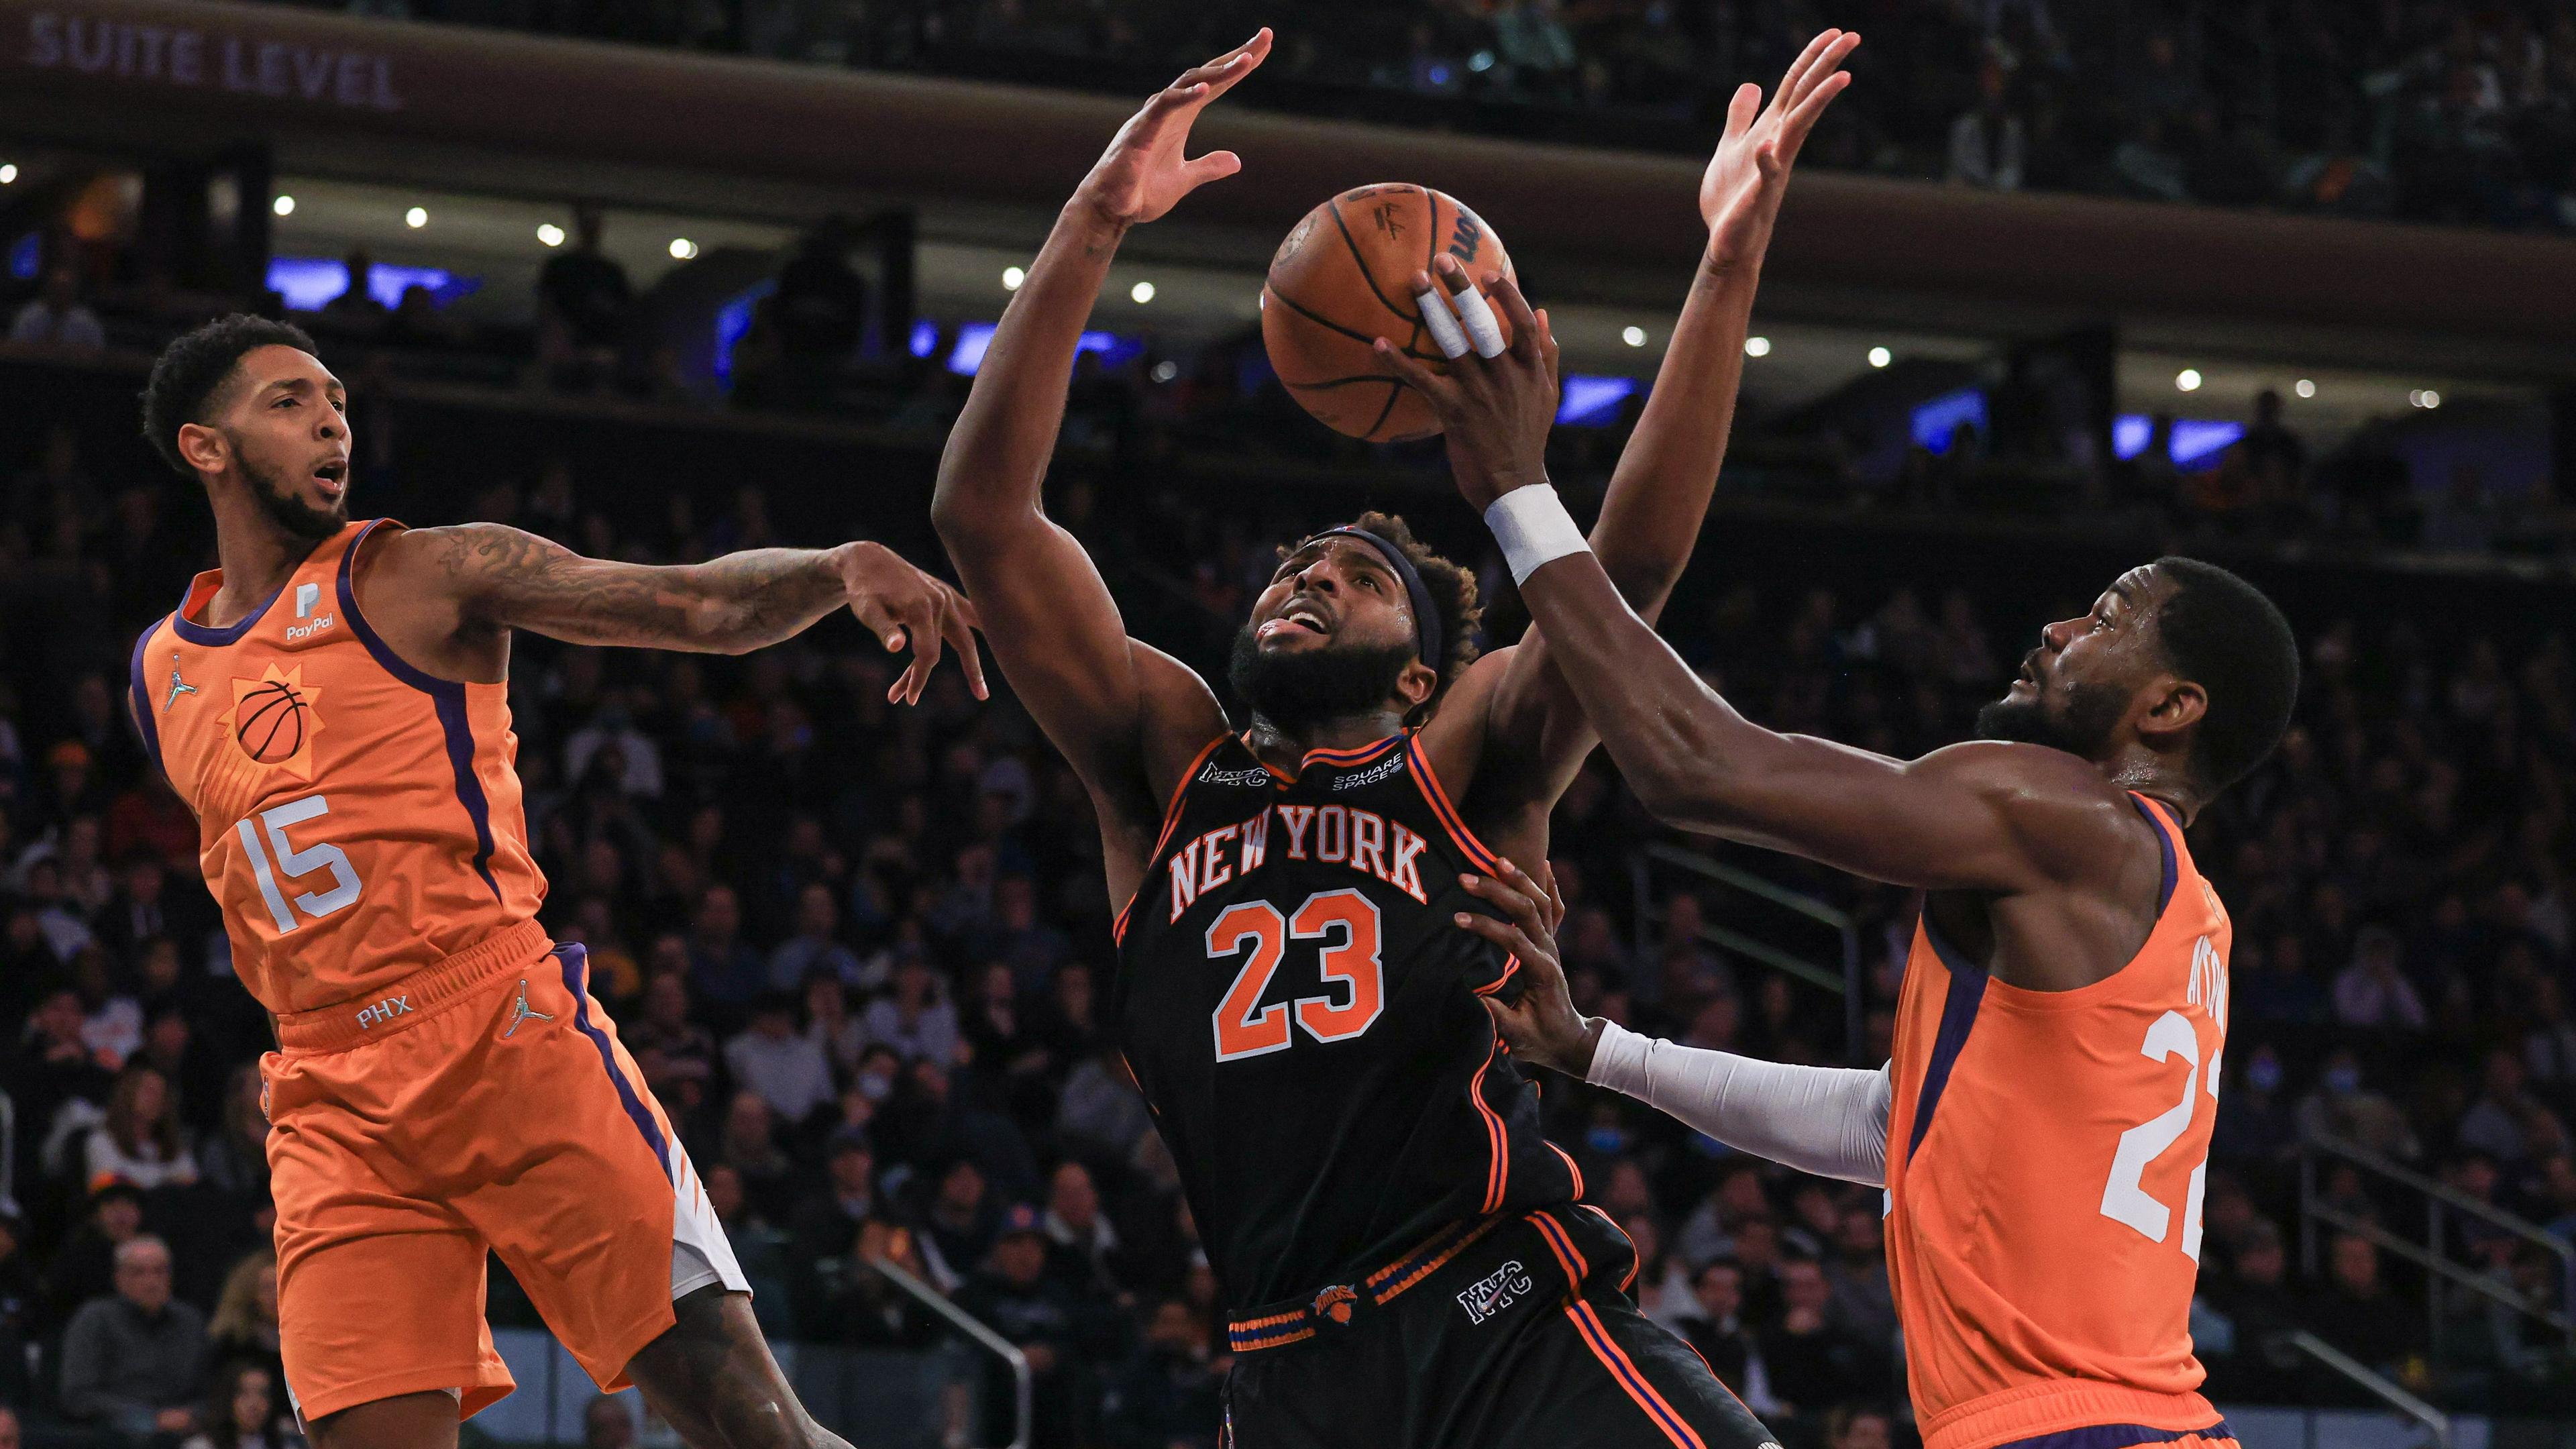 Nov 26, 2021; New York, New York, USA; New York Knicks center Mitchell Robinson (23) battles for a rebound against Phoenix Suns guard Cameron Payne (15) and center Deandre Ayton (22) during the first half at Madison Square Garden. / Vincent Carchietta-USA TODAY Sports